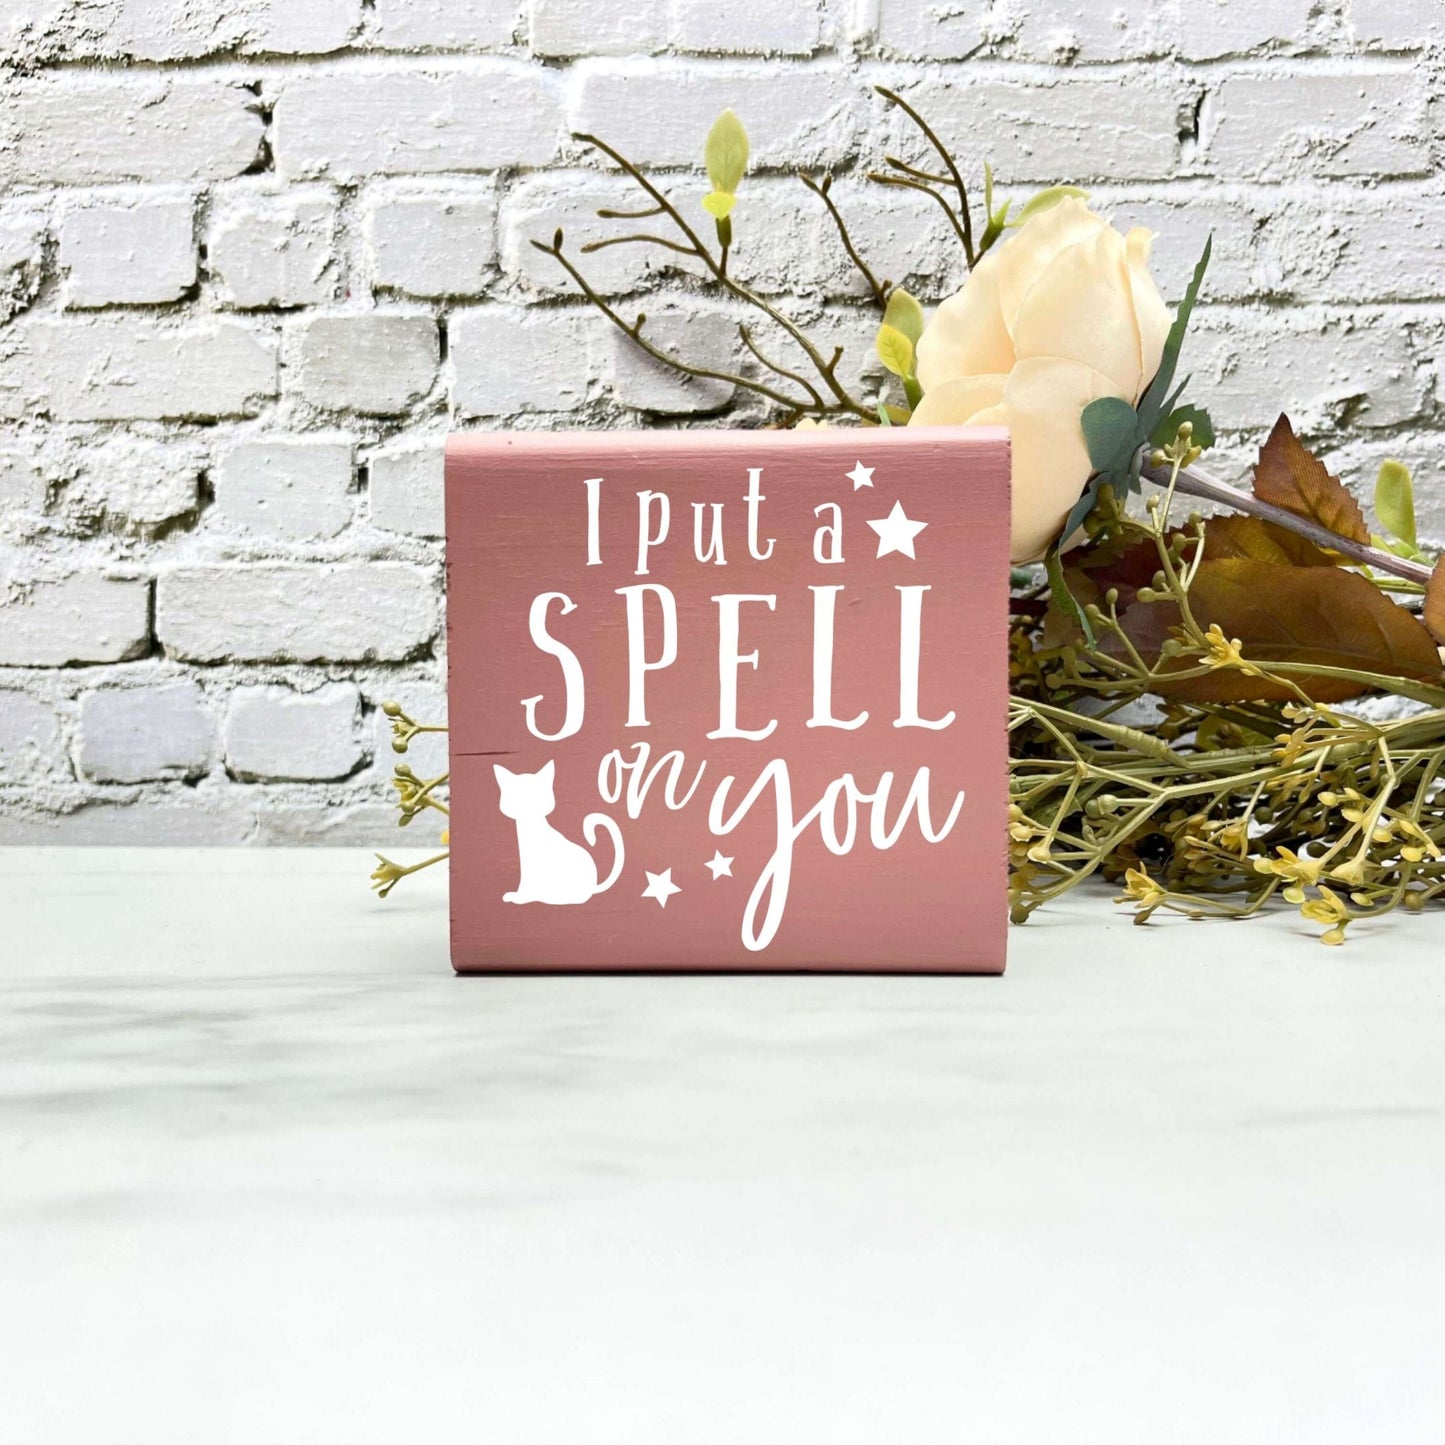 I put a spell on you Wood Sign, Halloween Wood Sign, Halloween Home Decor, Spooky Decor